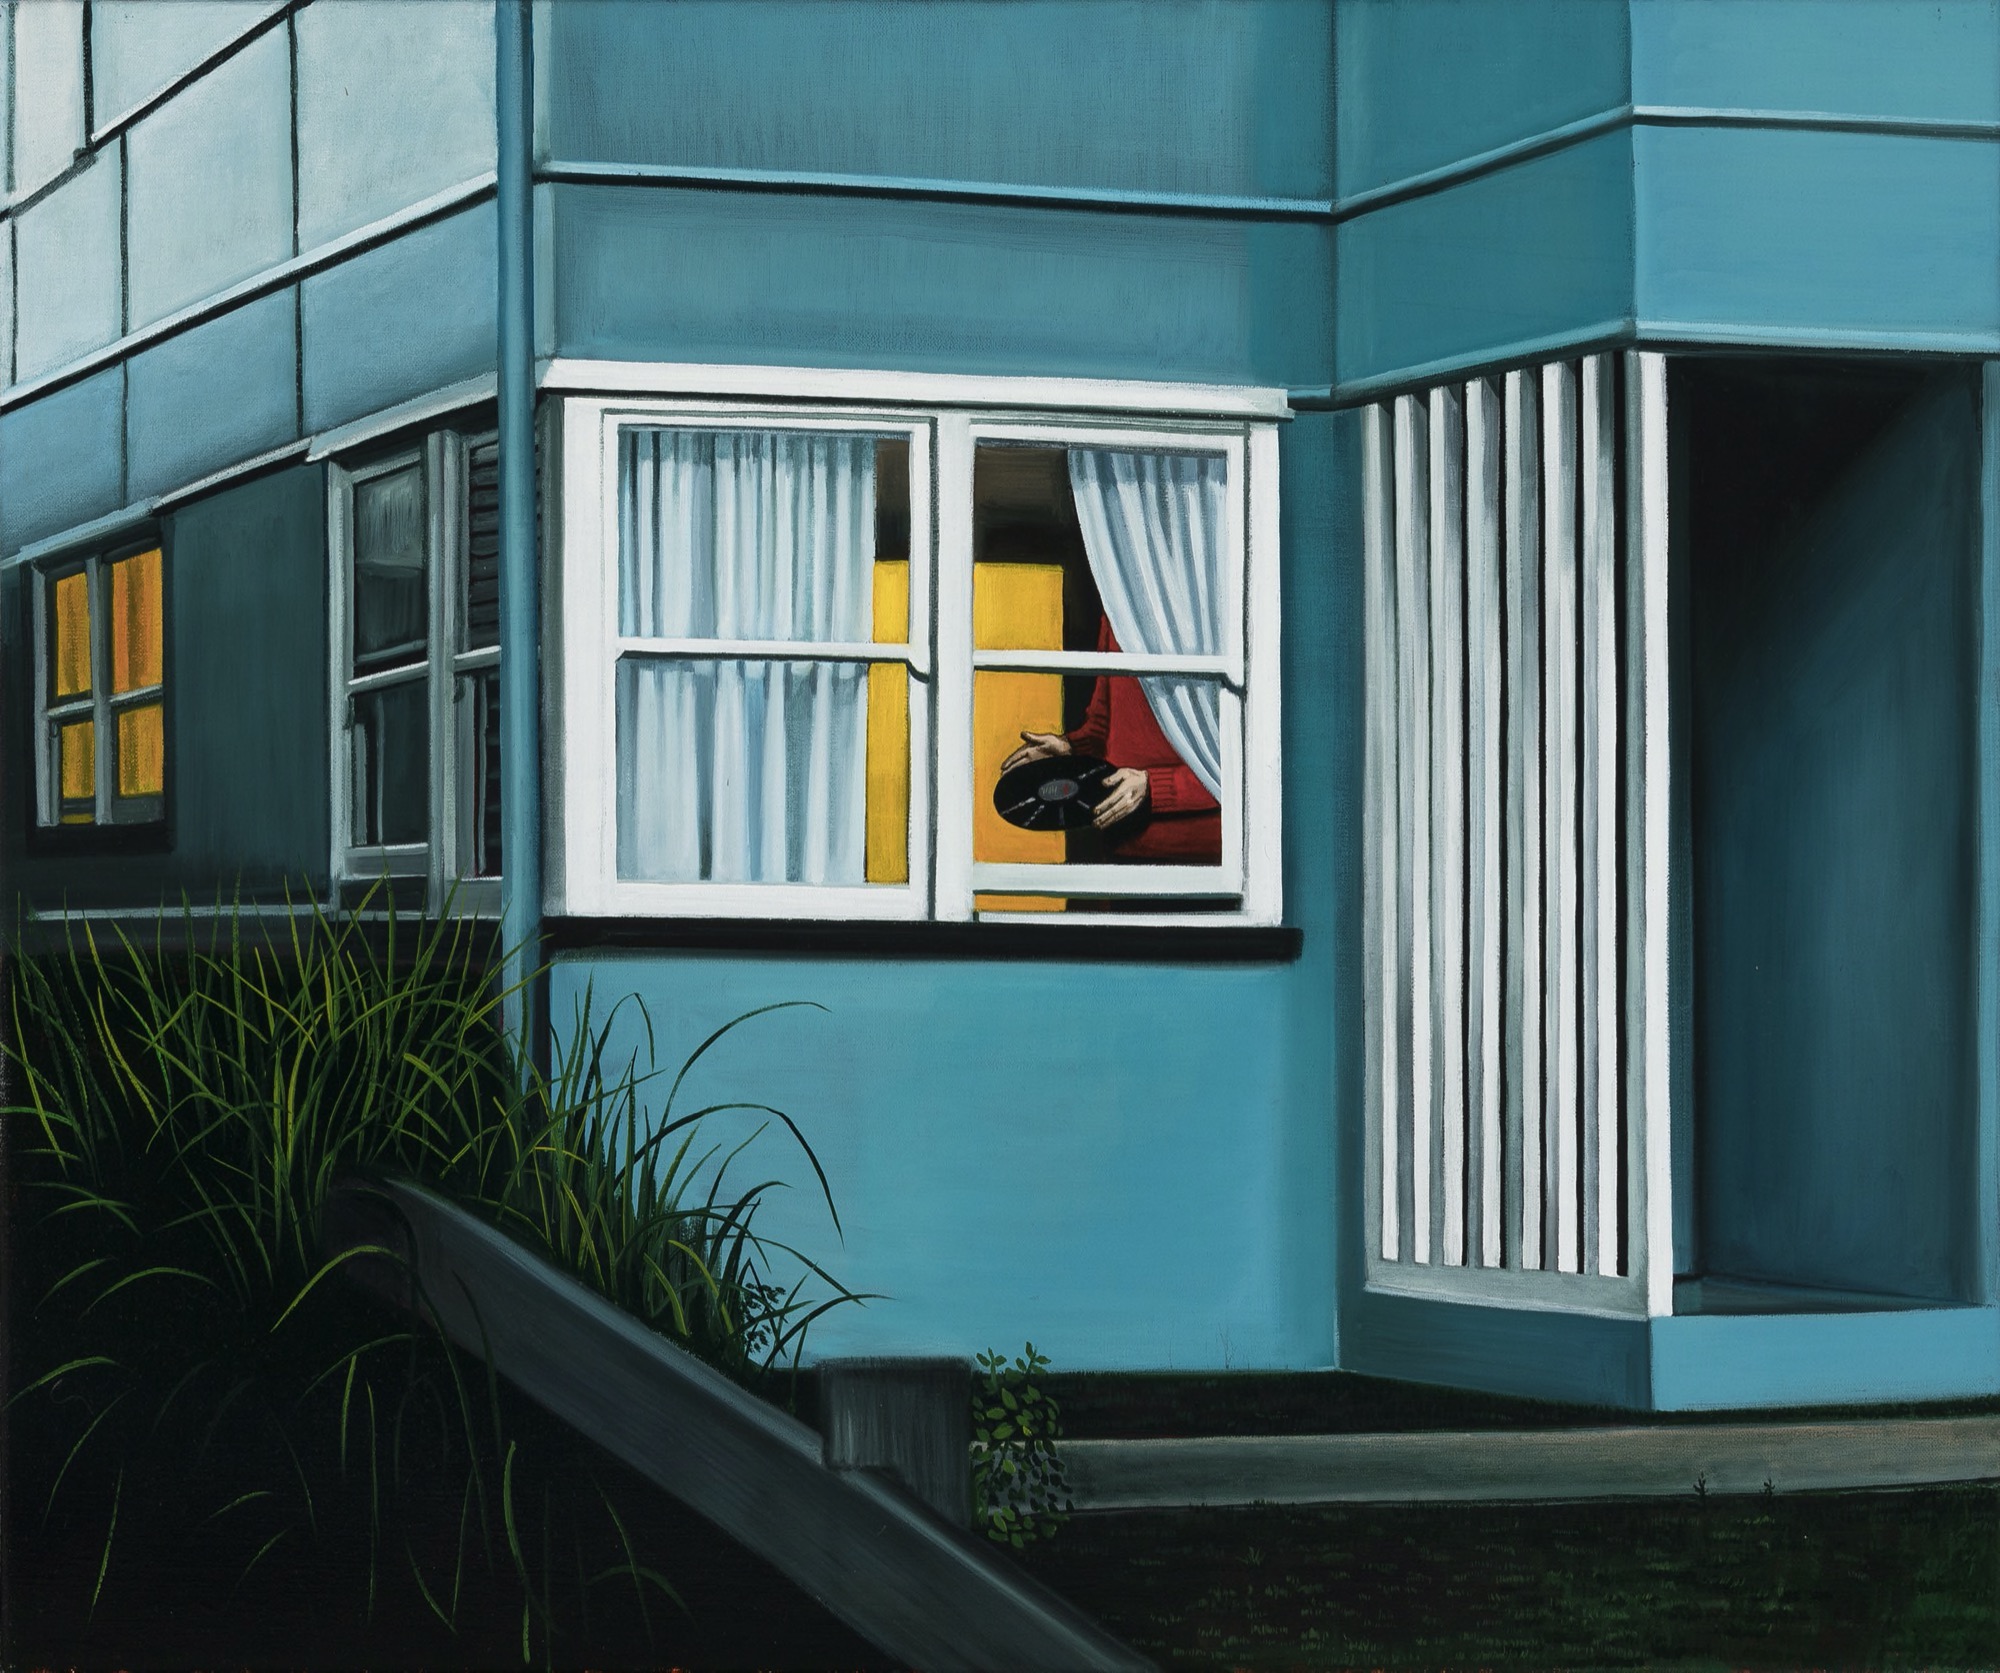 Anne Wallace, Dreaming of a Song, 2005. Oil on canvas, 59 x 74 cm. Courtesy of the Art Gallery of Ballarat.